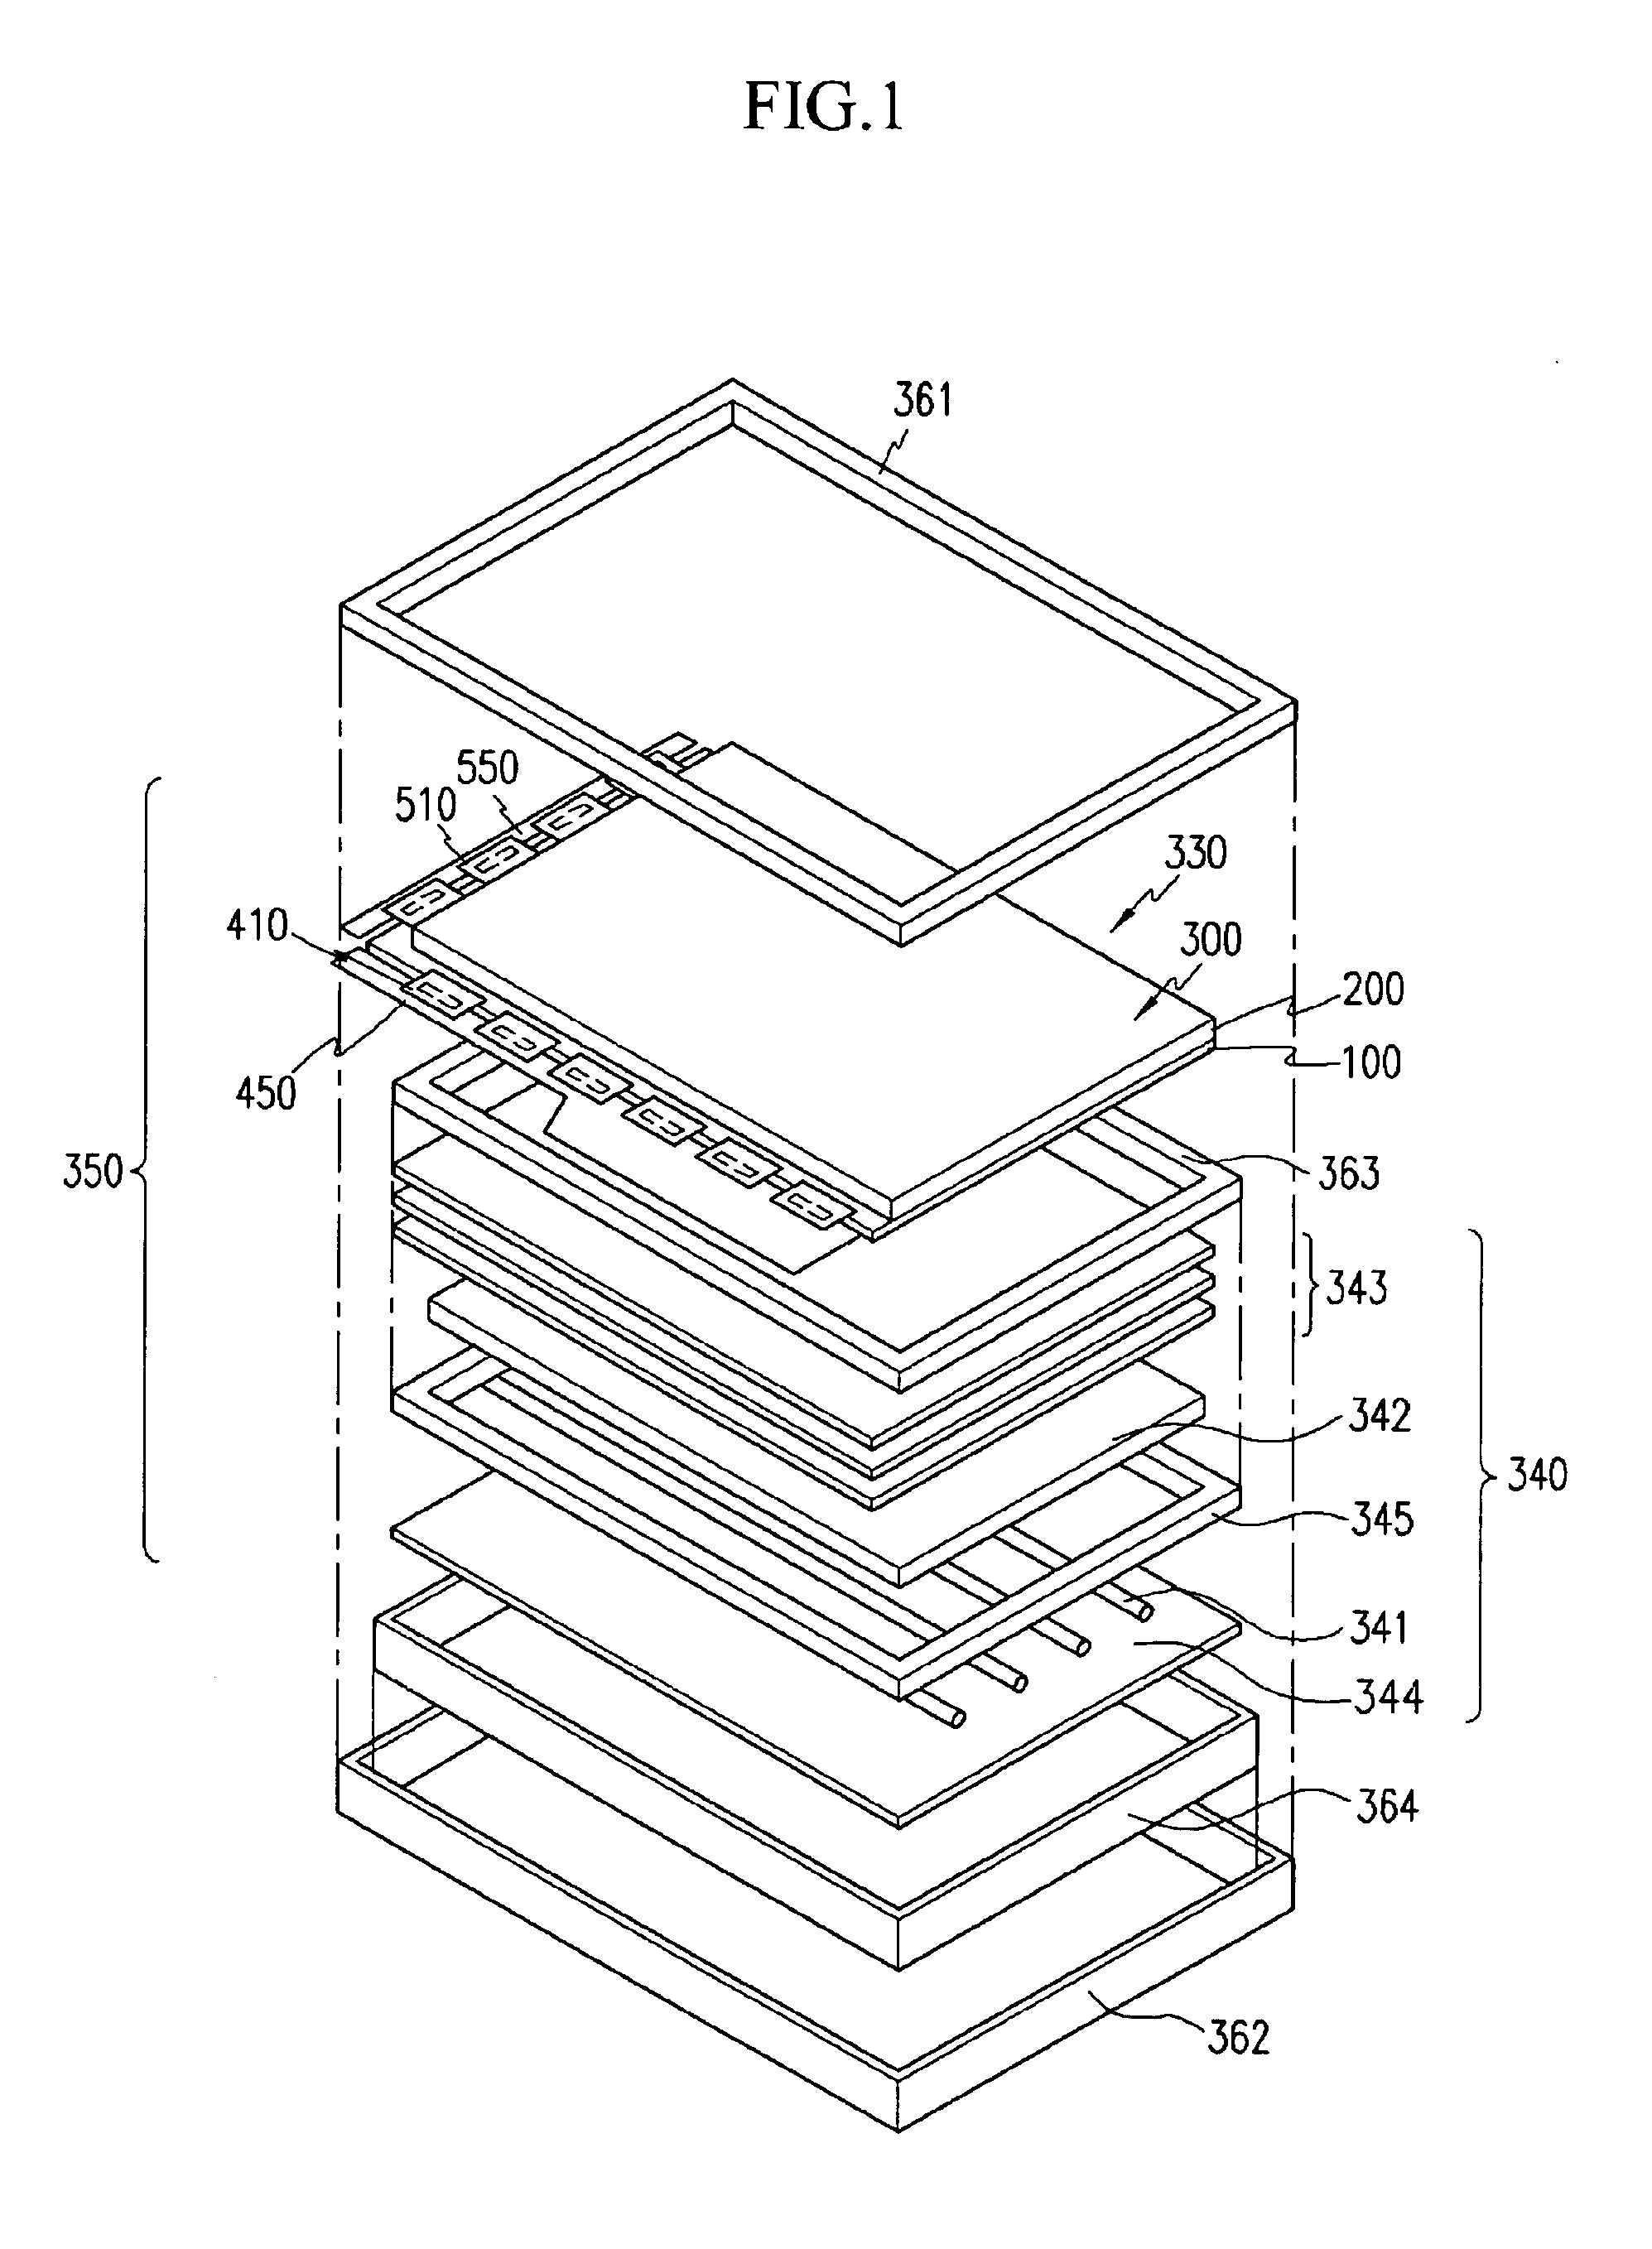 Display device and device of driving light source therefor